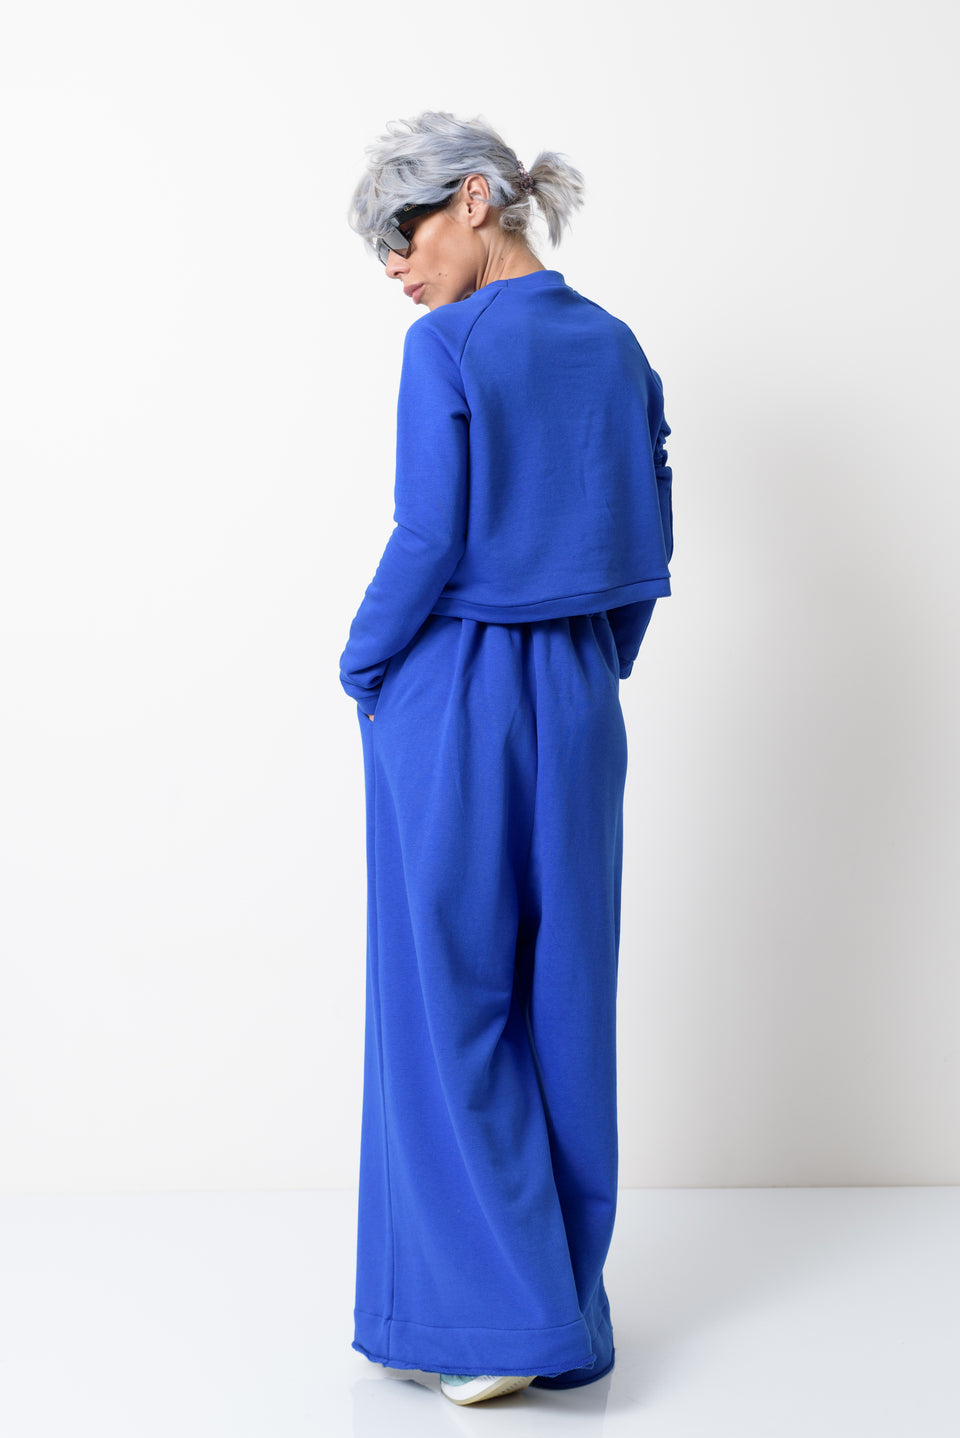 Royal Blue Two Piece Tracksuit Set For Women - Clothes By Locker Room